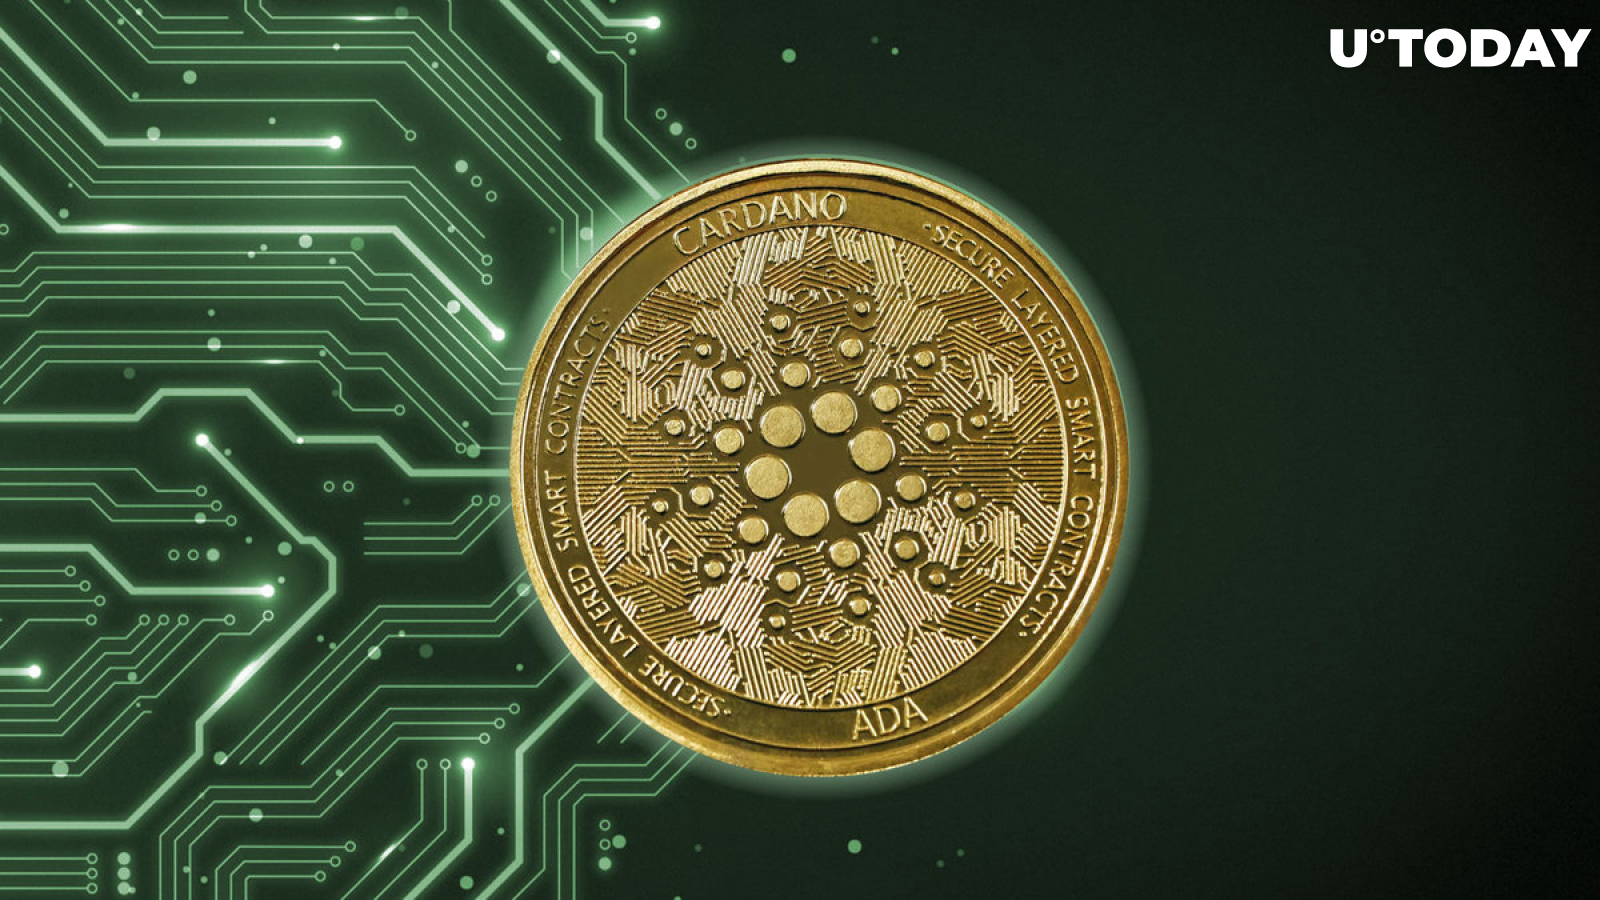 Cardano (ADA) Called Green Blockchain, Here's Why This Is True